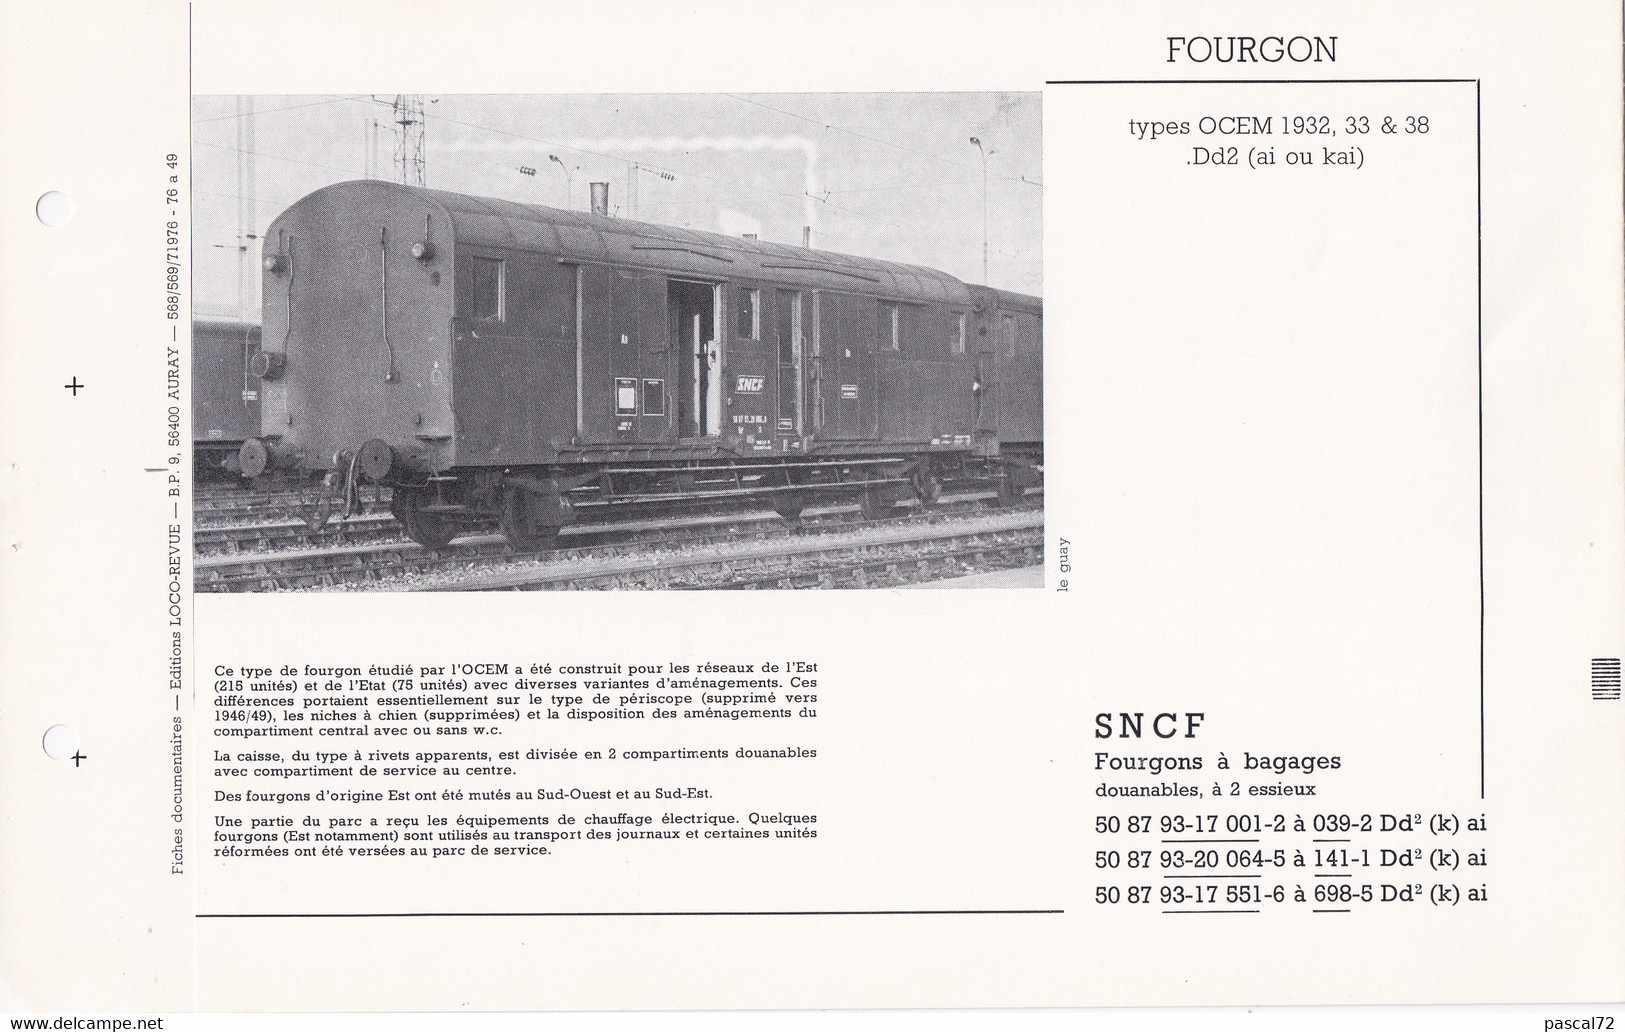 FOURGON TYPES OCEM FICHE DOCUMENTAIRE DOUBLE LOCO REVUE N° 588/589 JUILLET 1976 - French